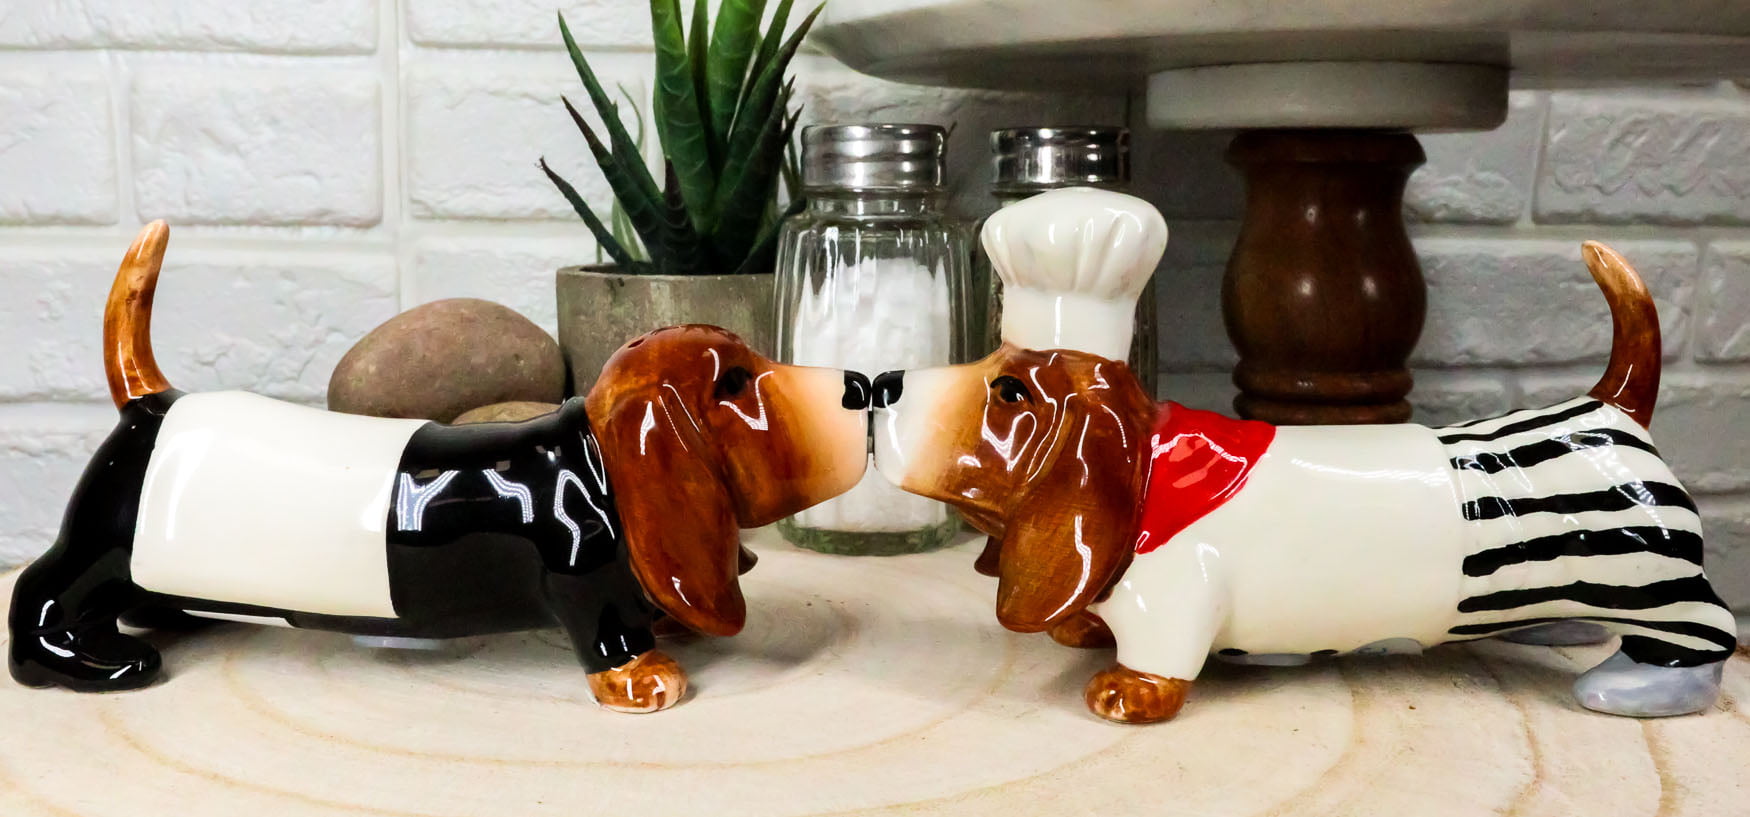 Ebros Realistic Groomed White French Poodle Puppy Dog Glass Salt And Pepper Shakers Holder Figurine 6.25Tall Whimsical Hugging Poodles Pet Memorial Animal Dogs Decor Statue 